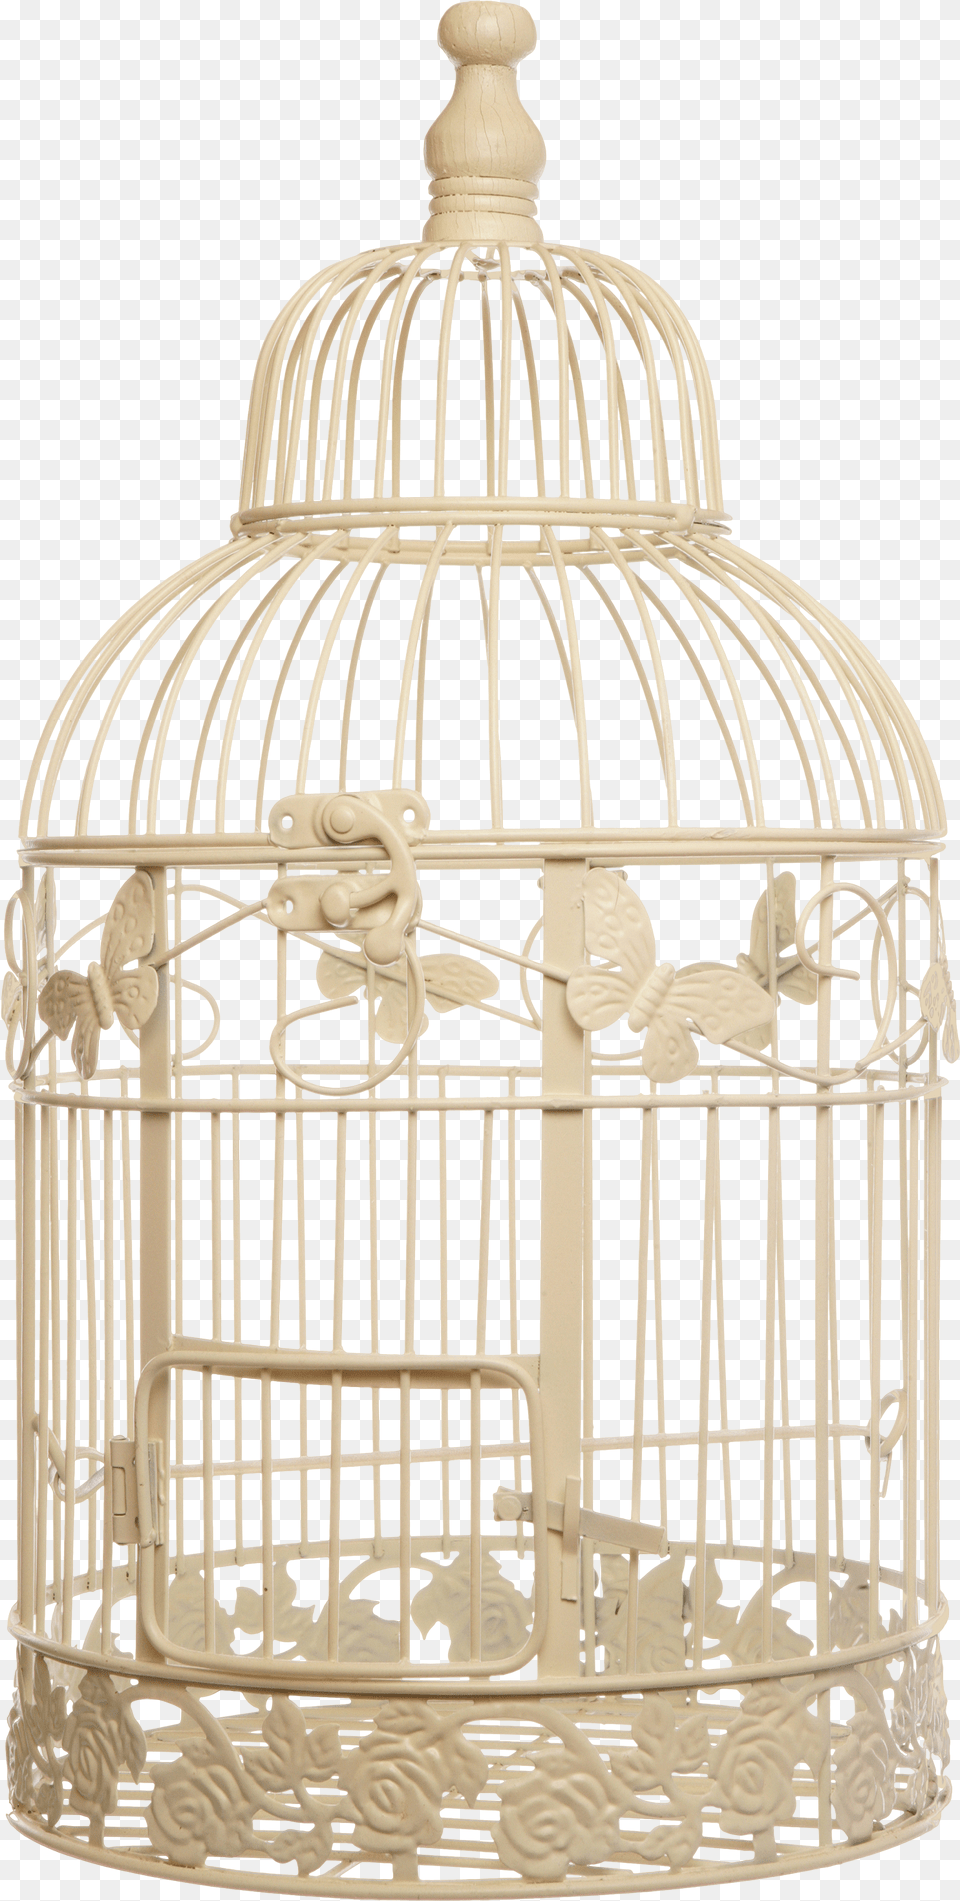 White Bird Cage Image For White Bird Cages Free Png Download